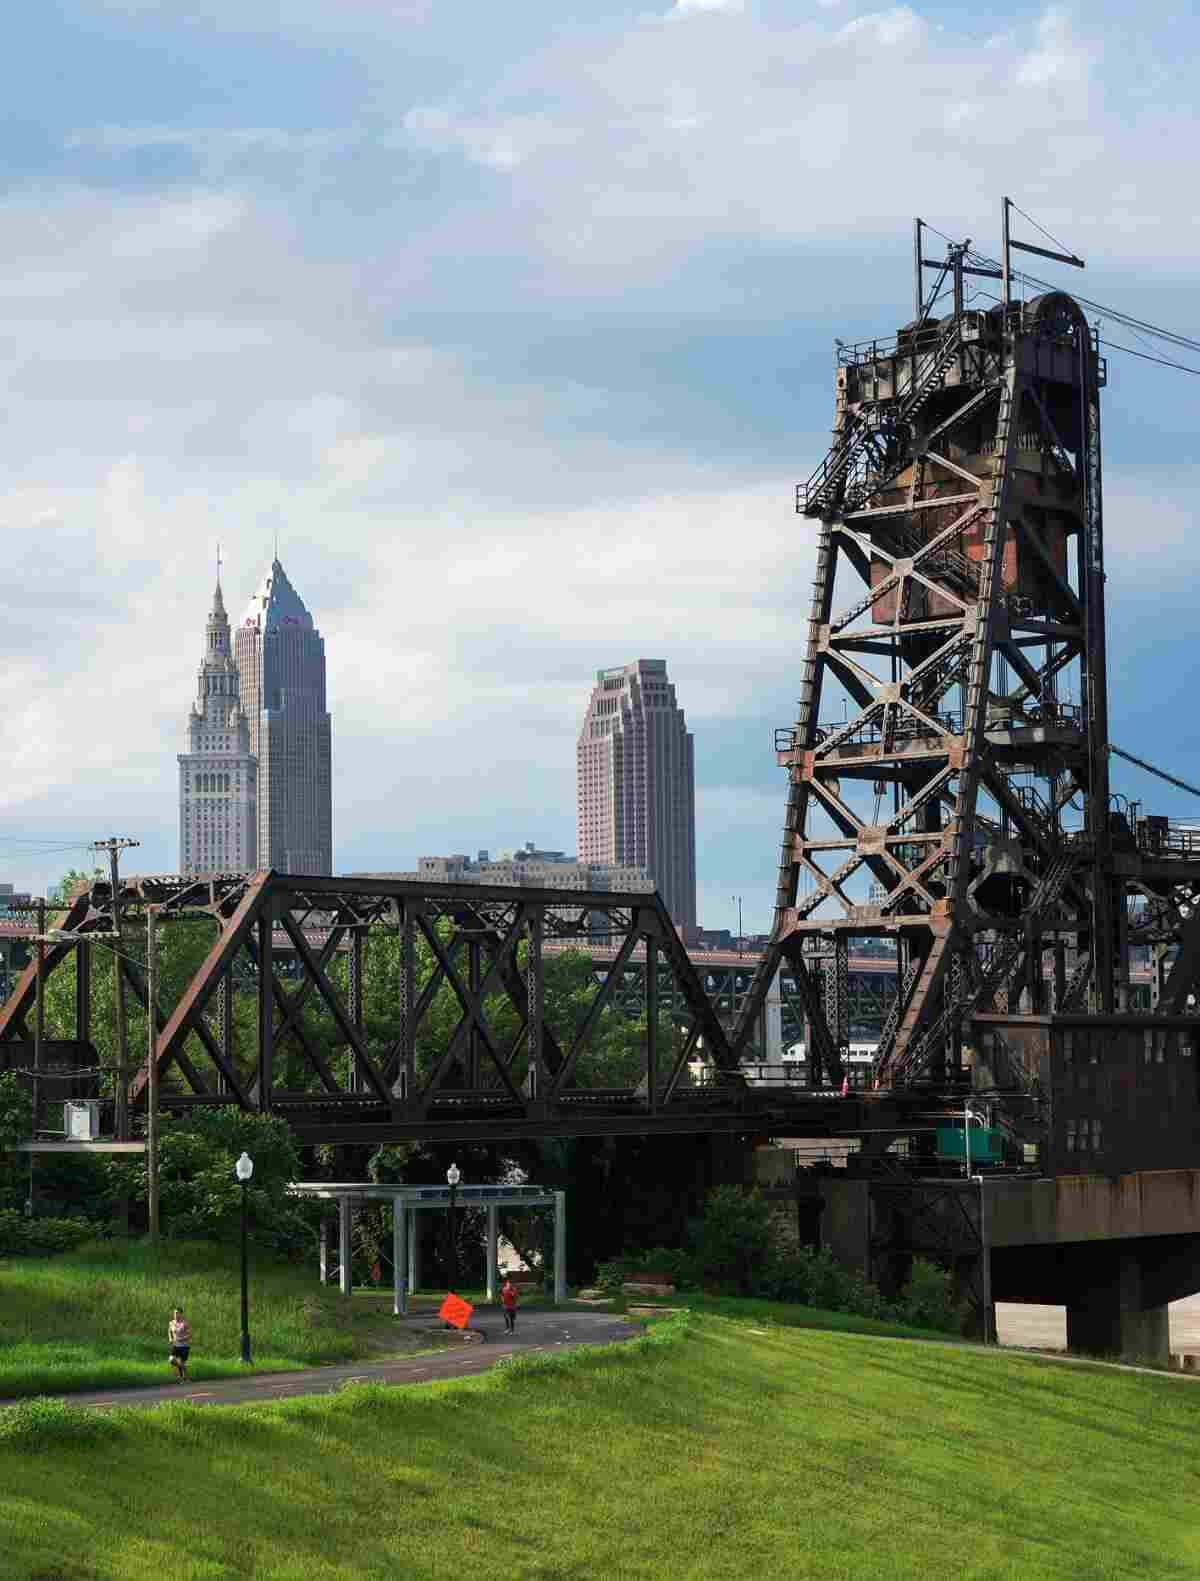 Towpath Trail in the city of Cleveland